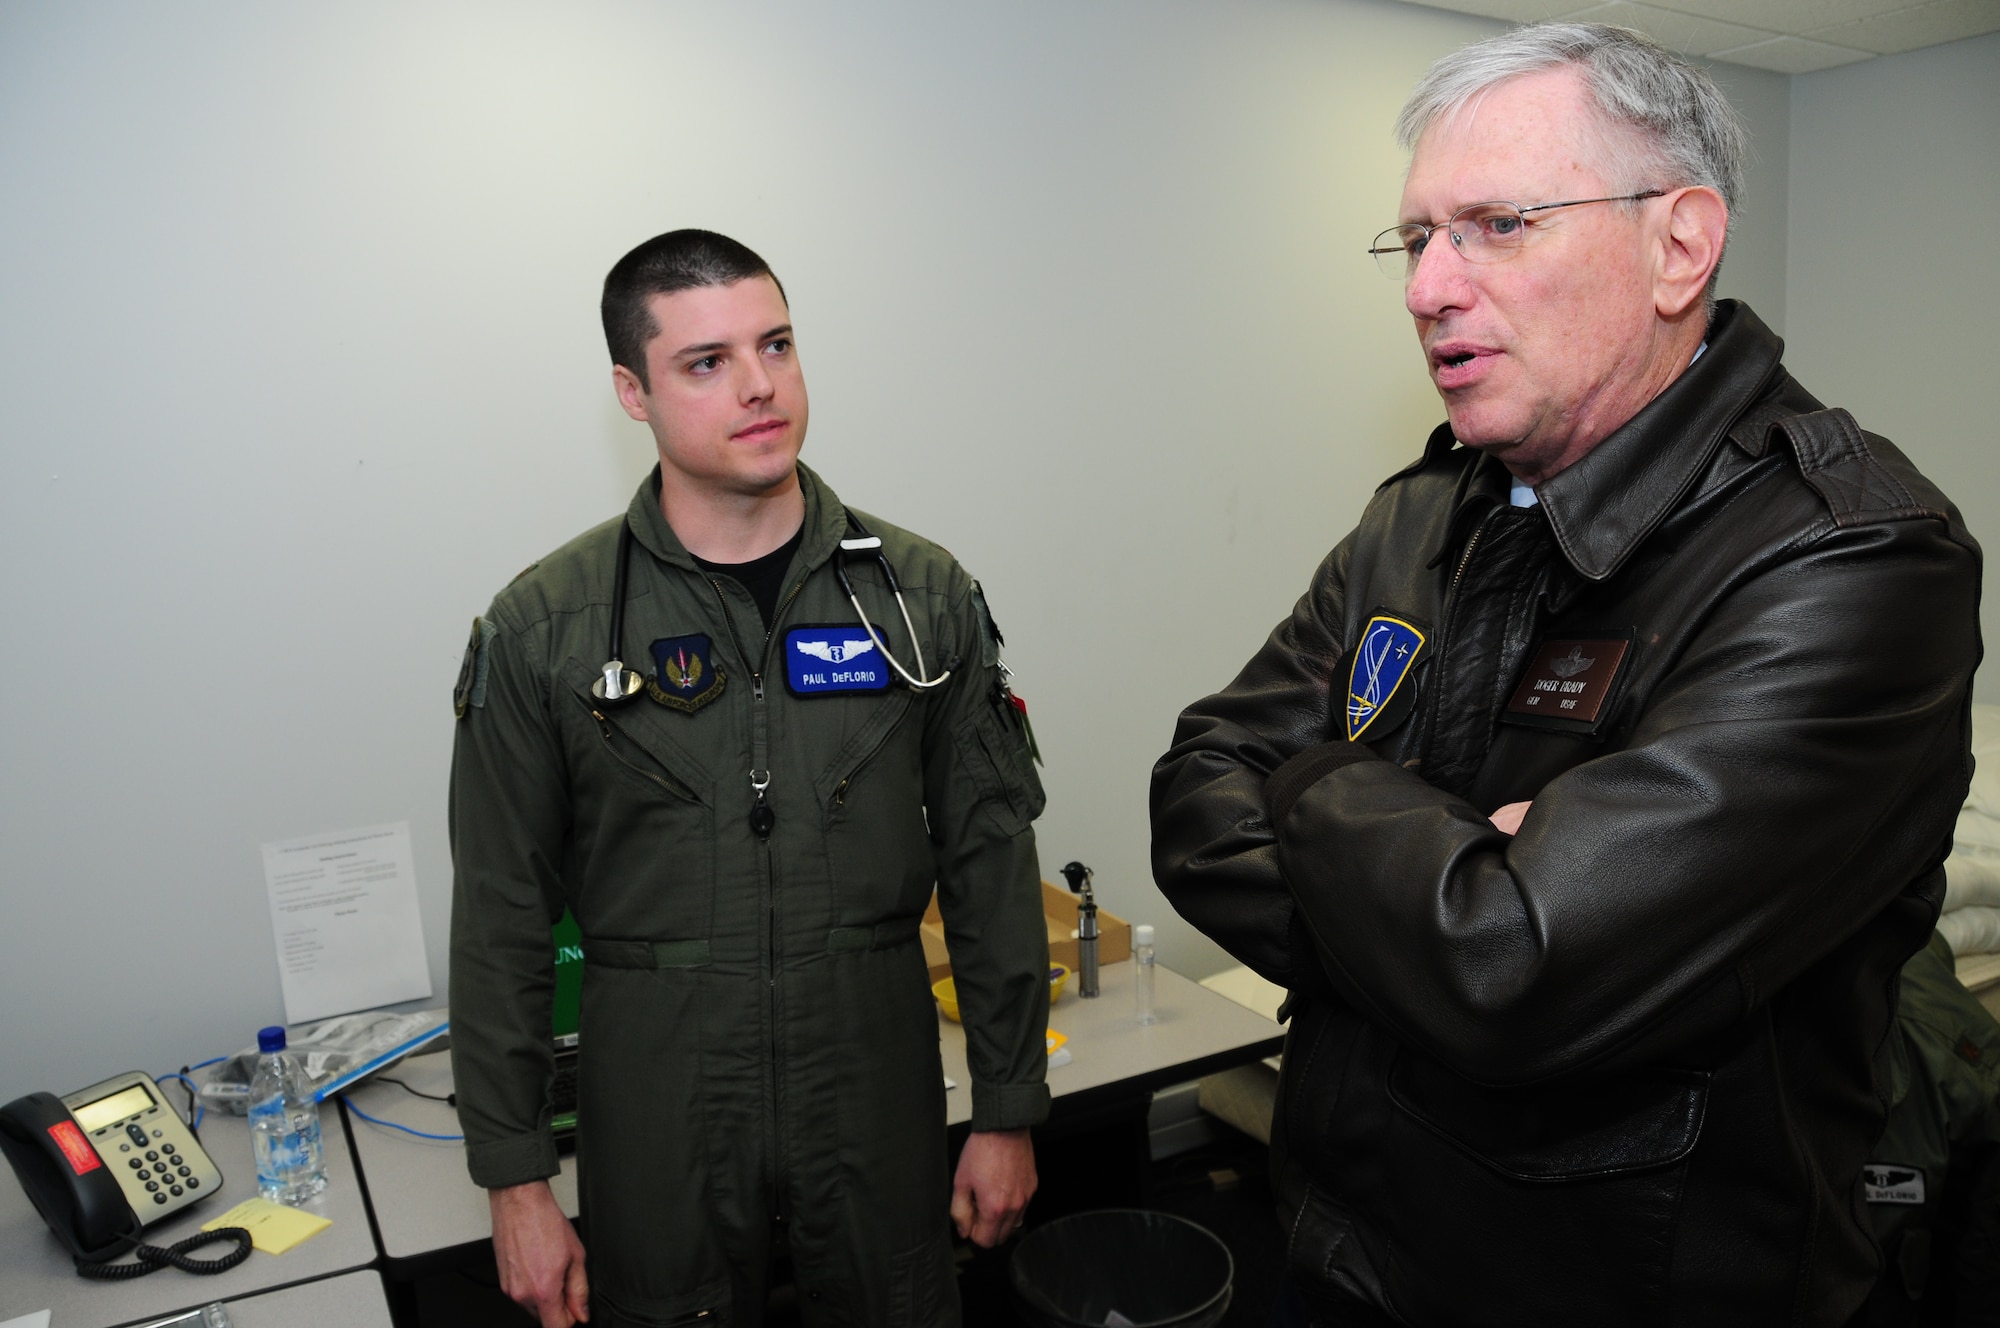 KEFLAVIK, Iceland – Maj. Paul DeFlorio, a flight surgeon with the 493rd Expeditionary Fighter Squadron, briefs Gen. Roger A. Brady, U.S. Air Forces in Europe commander, on local civilian medical facilities and search and rescue Sept. 22. Major DeFlorio is deployed from the 492rd Fighter Squadron at RAF Lakenheath, United Kingdom, and calls Ridgefield, Conn., home. (U.S. Air Force photo/Senior Airman Stephen Linch)